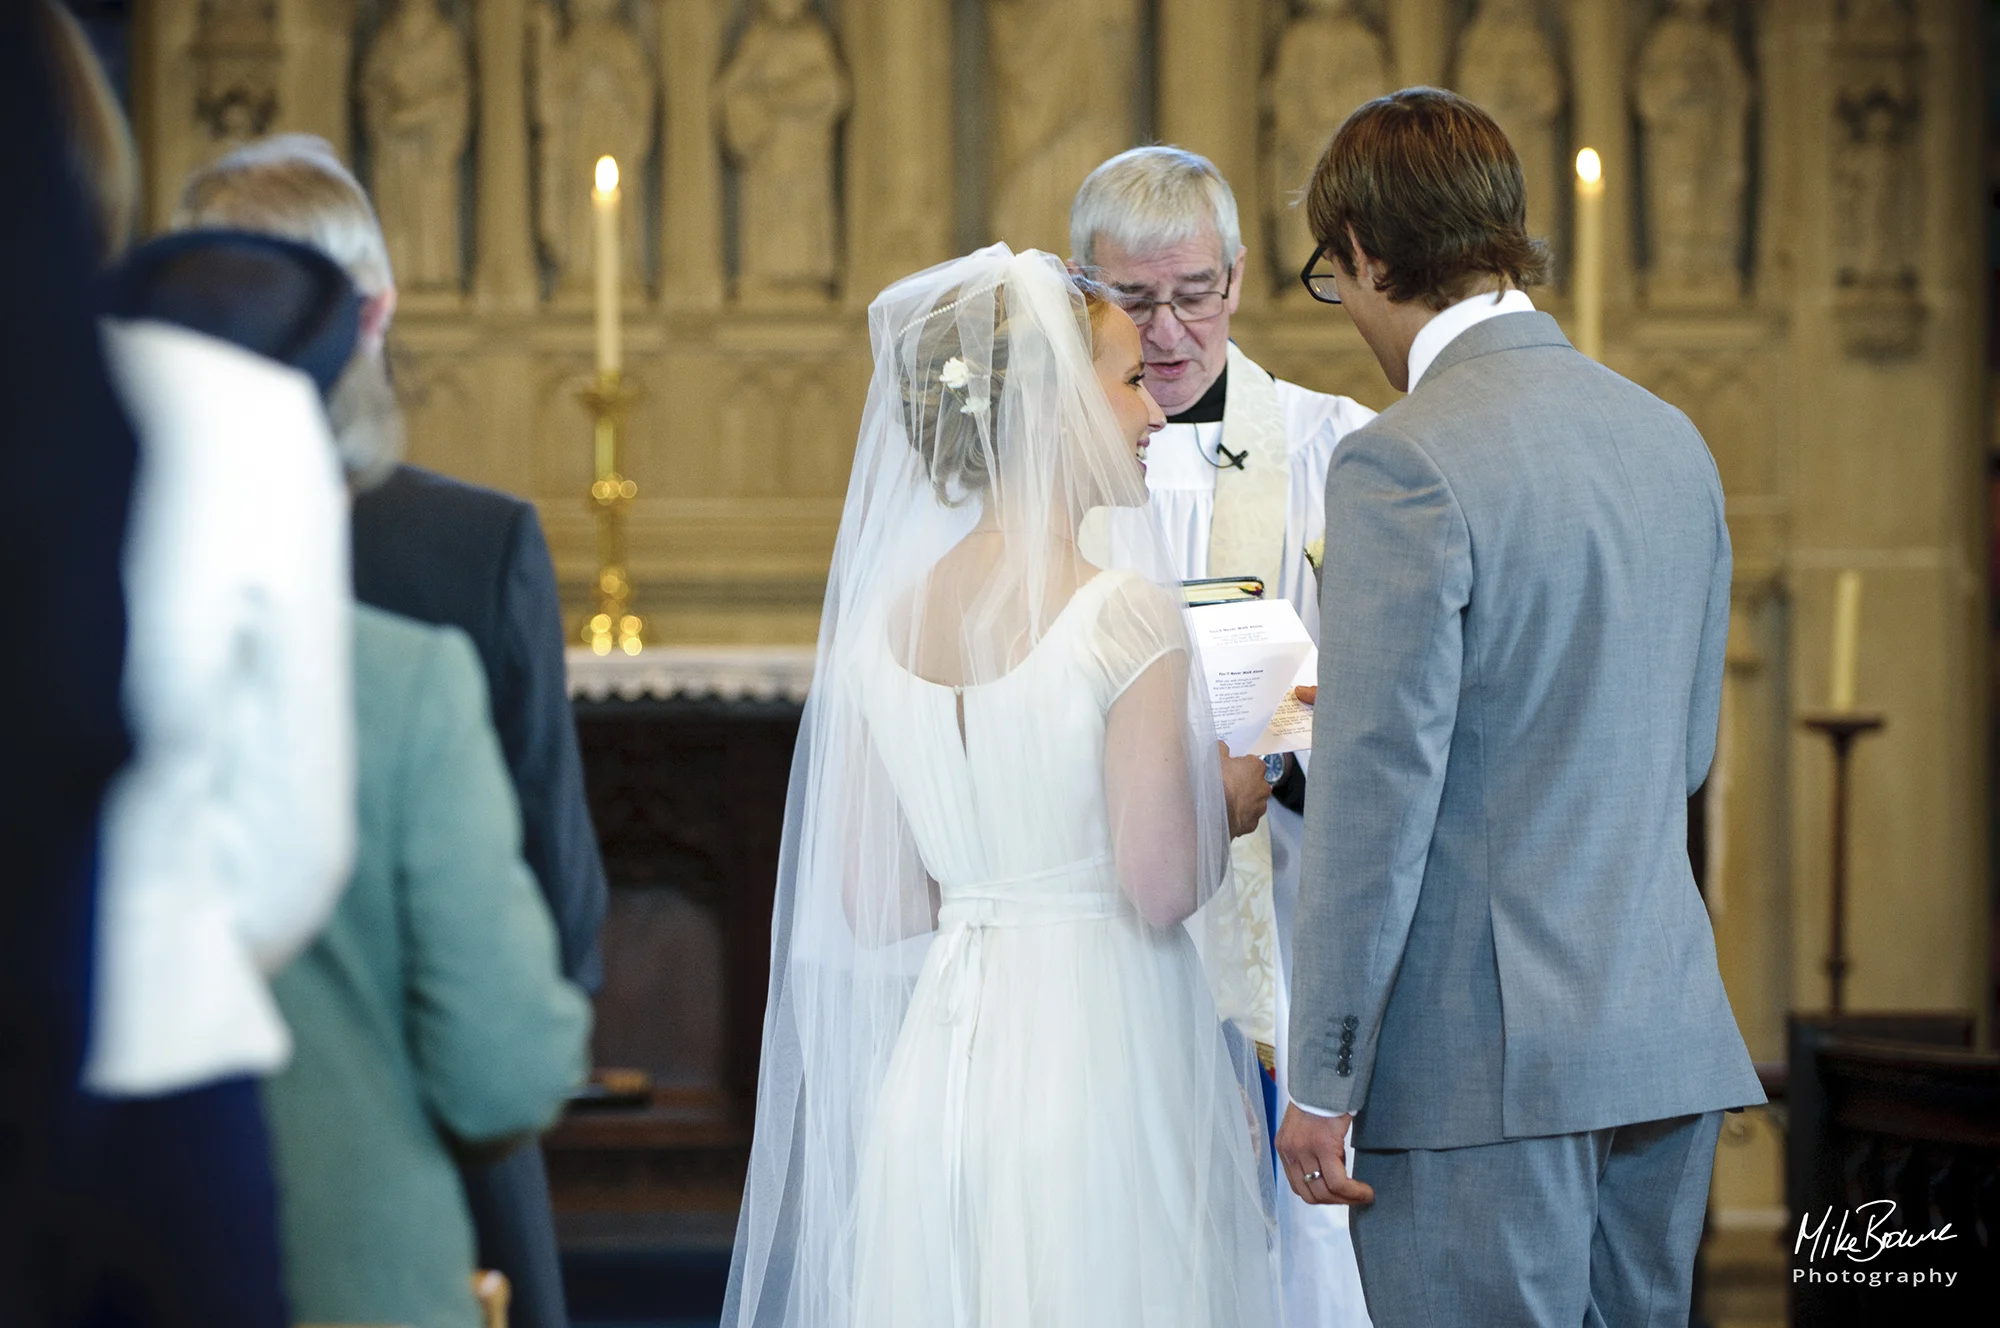 Bride cannot take her eyes off her new husband whilst singing a hymn at their wedding